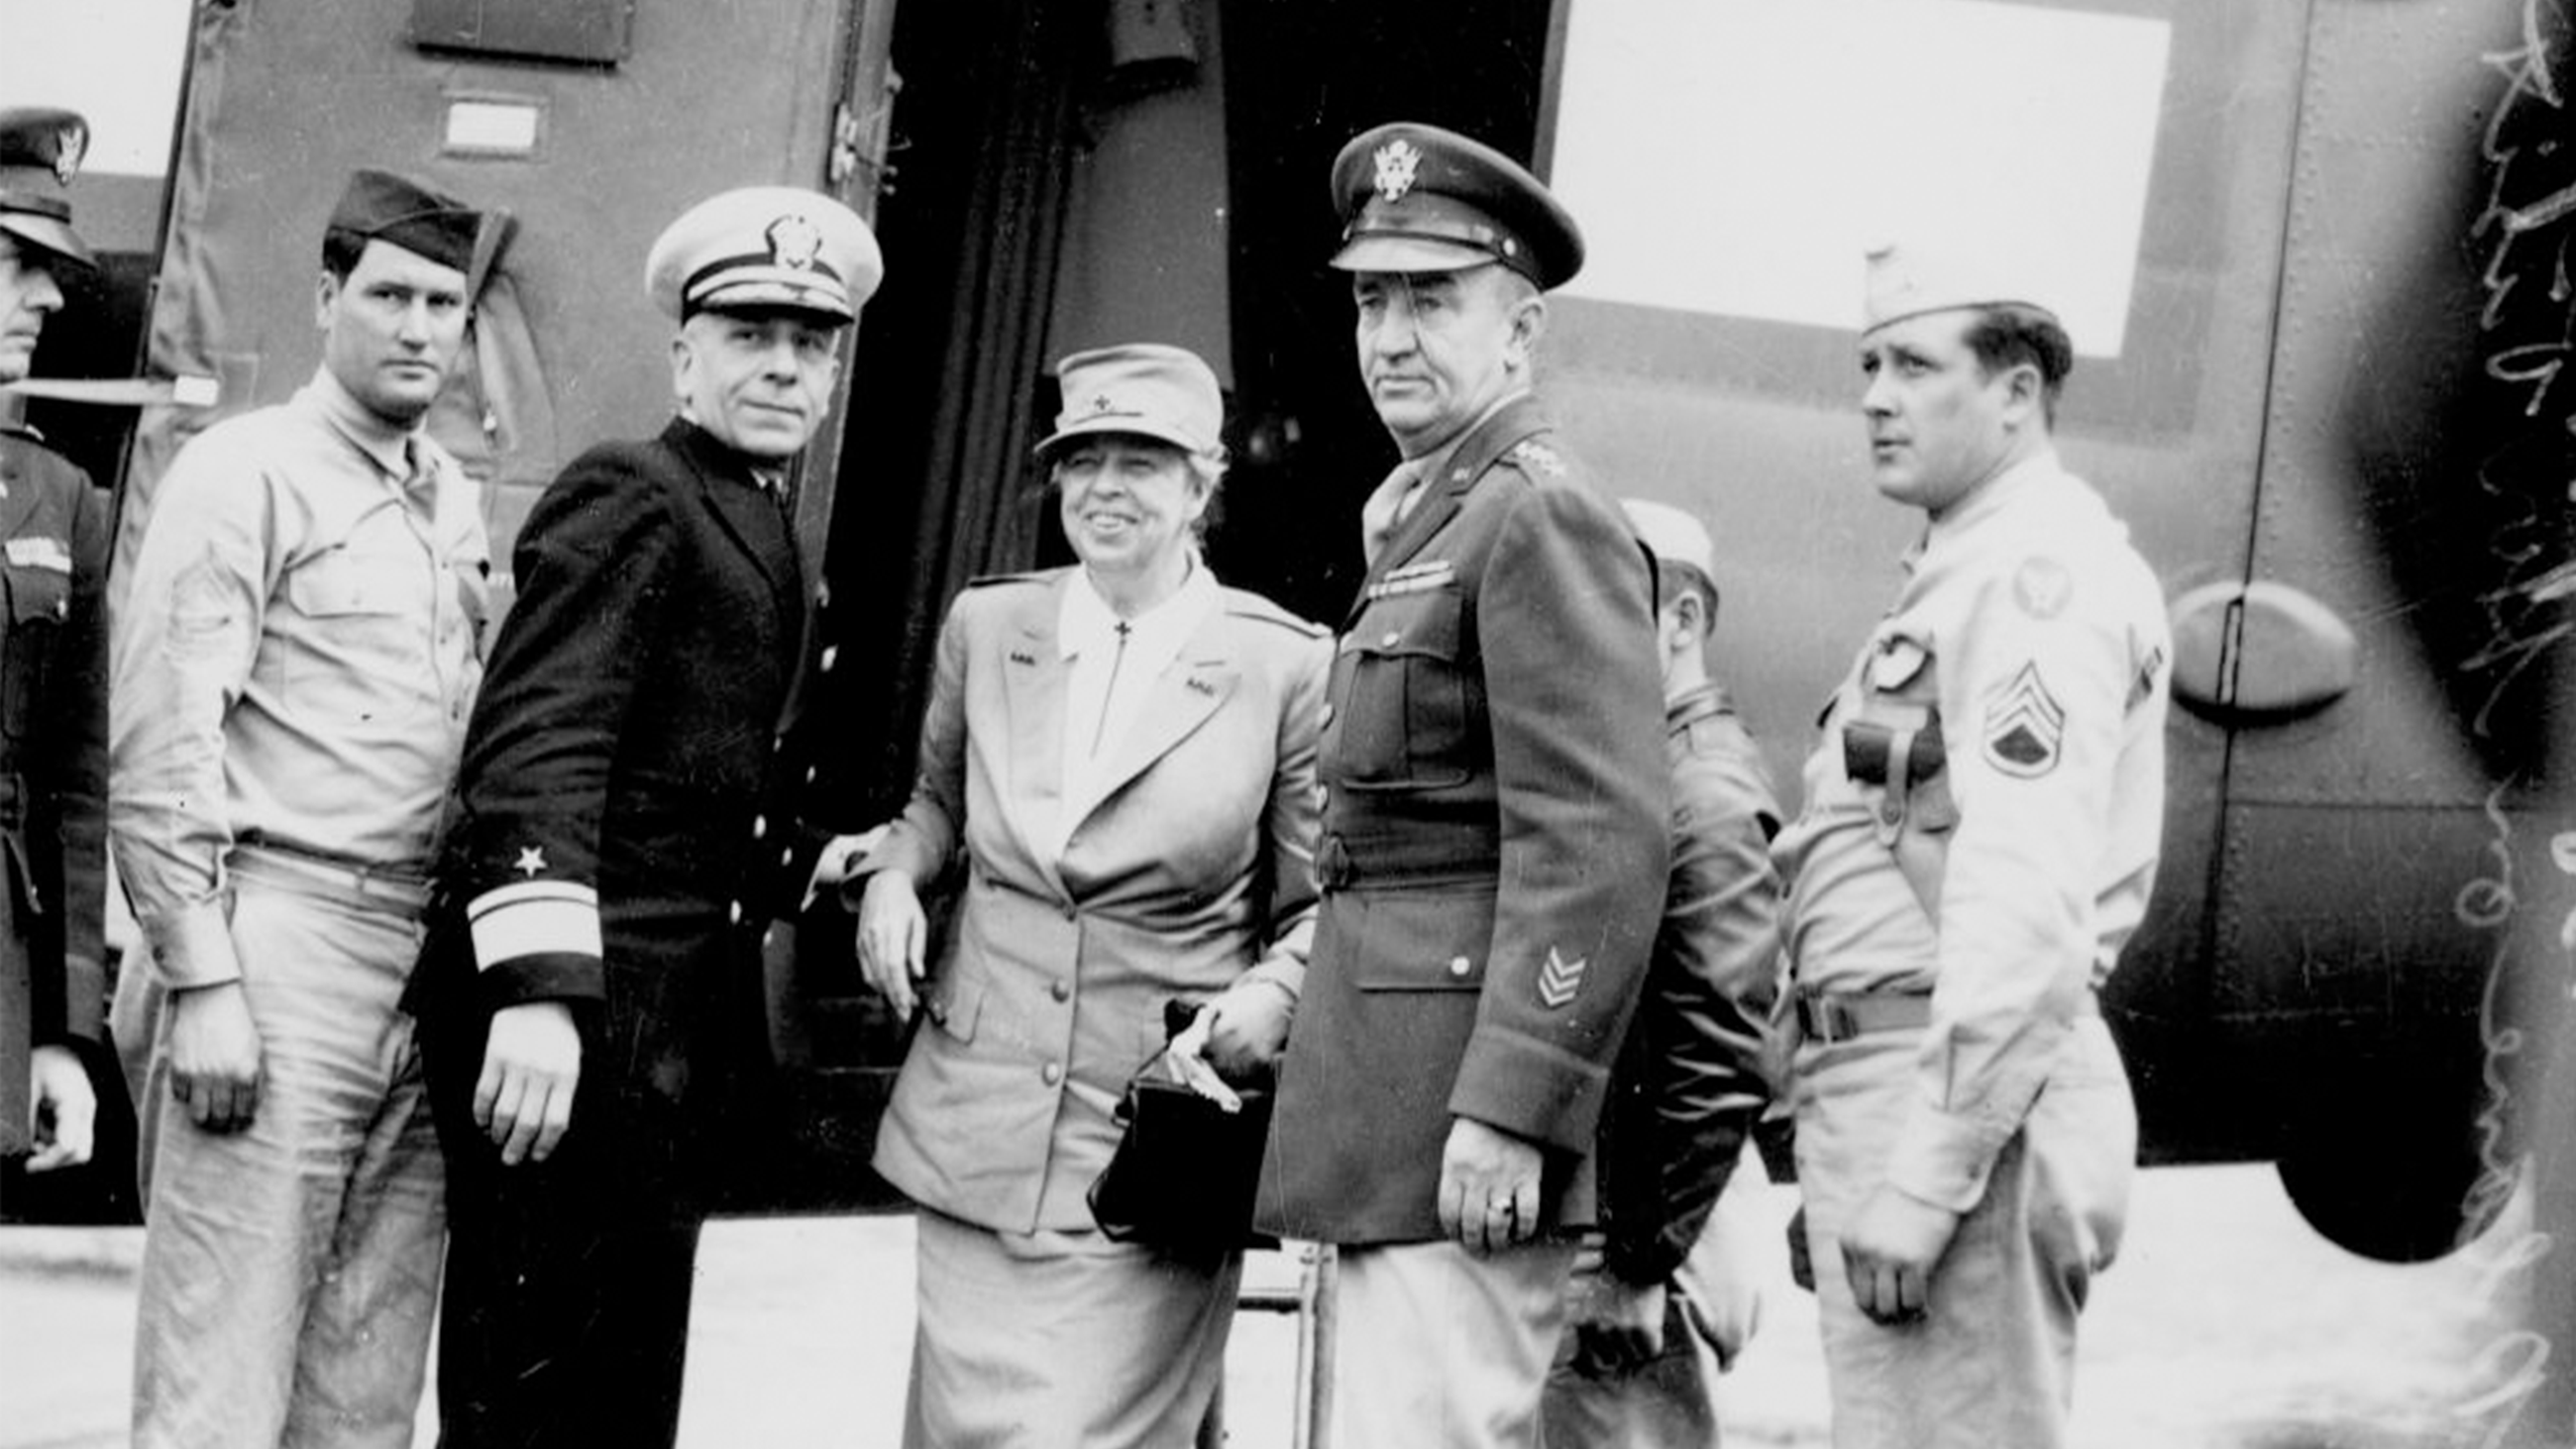 Eleanor Roosevelt disembarking from her flight in Brisbane. She is smiling and flanked by four military representatives.